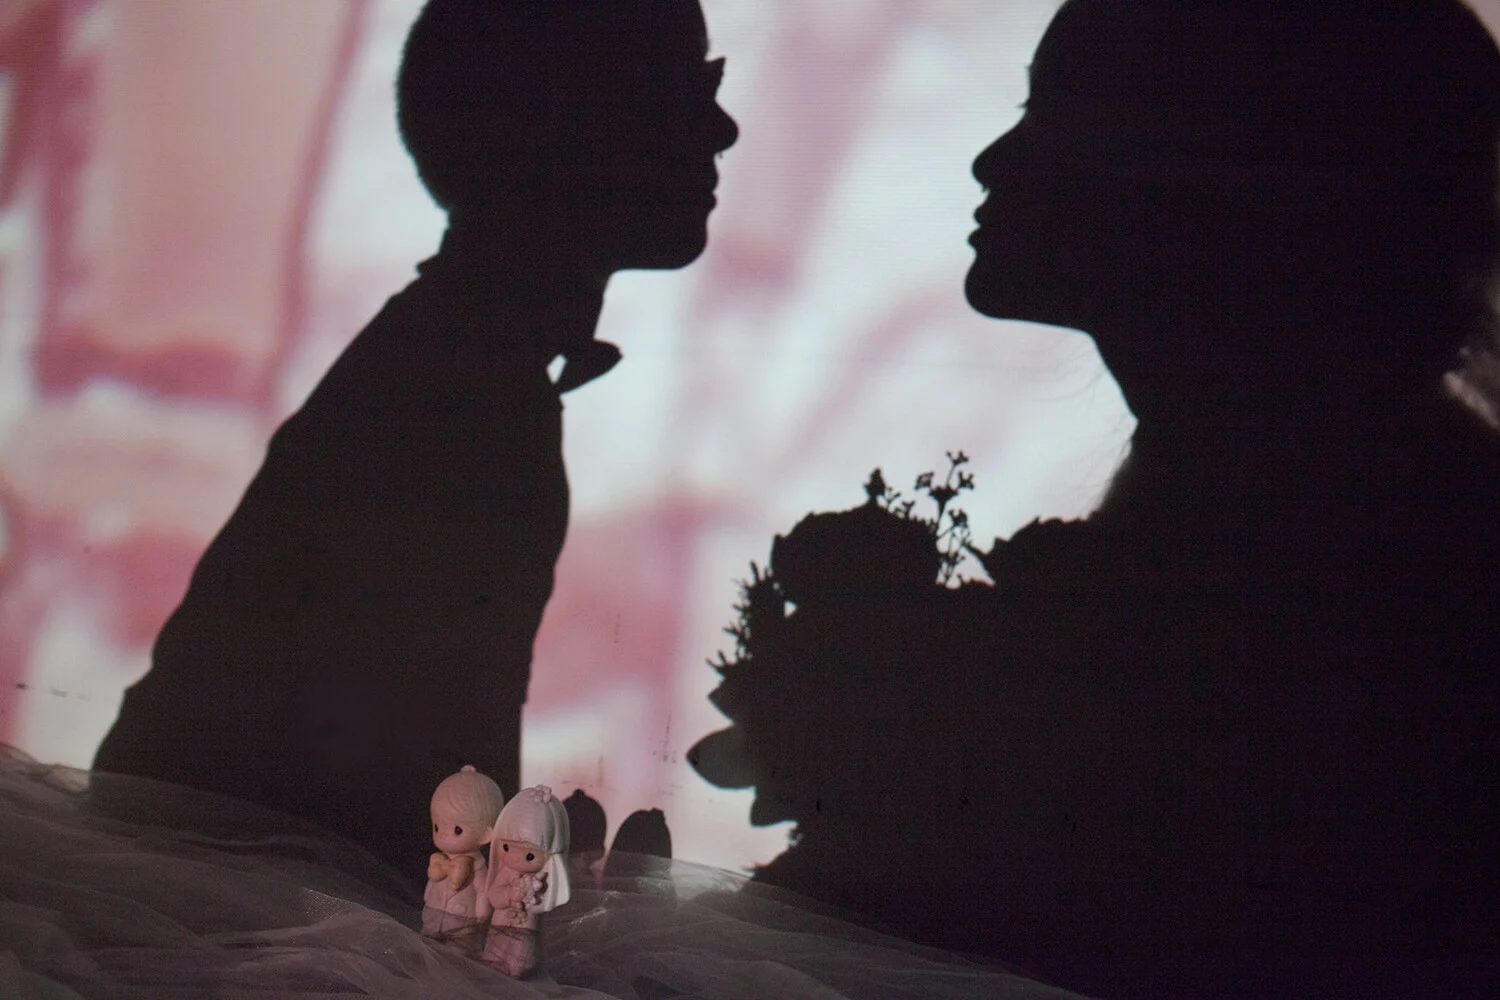 The shadows of Sy and Jonit loom over a figurine of a male-female pair in wedding attire.